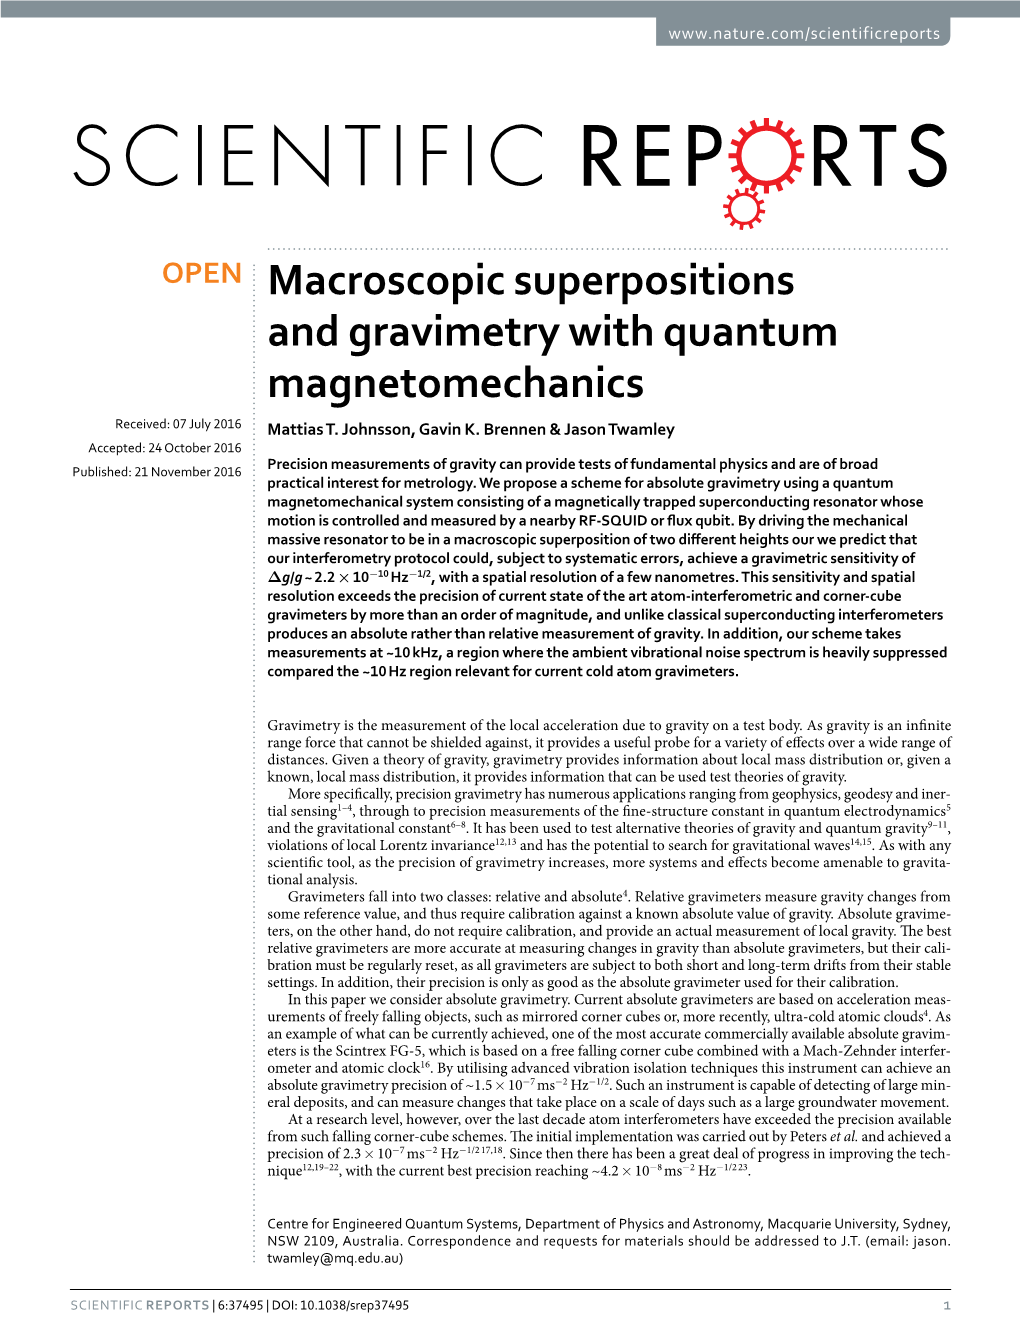 Macroscopic Superpositions and Gravimetry with Quantum Magnetomechanics Received: 07 July 2016 Mattias T